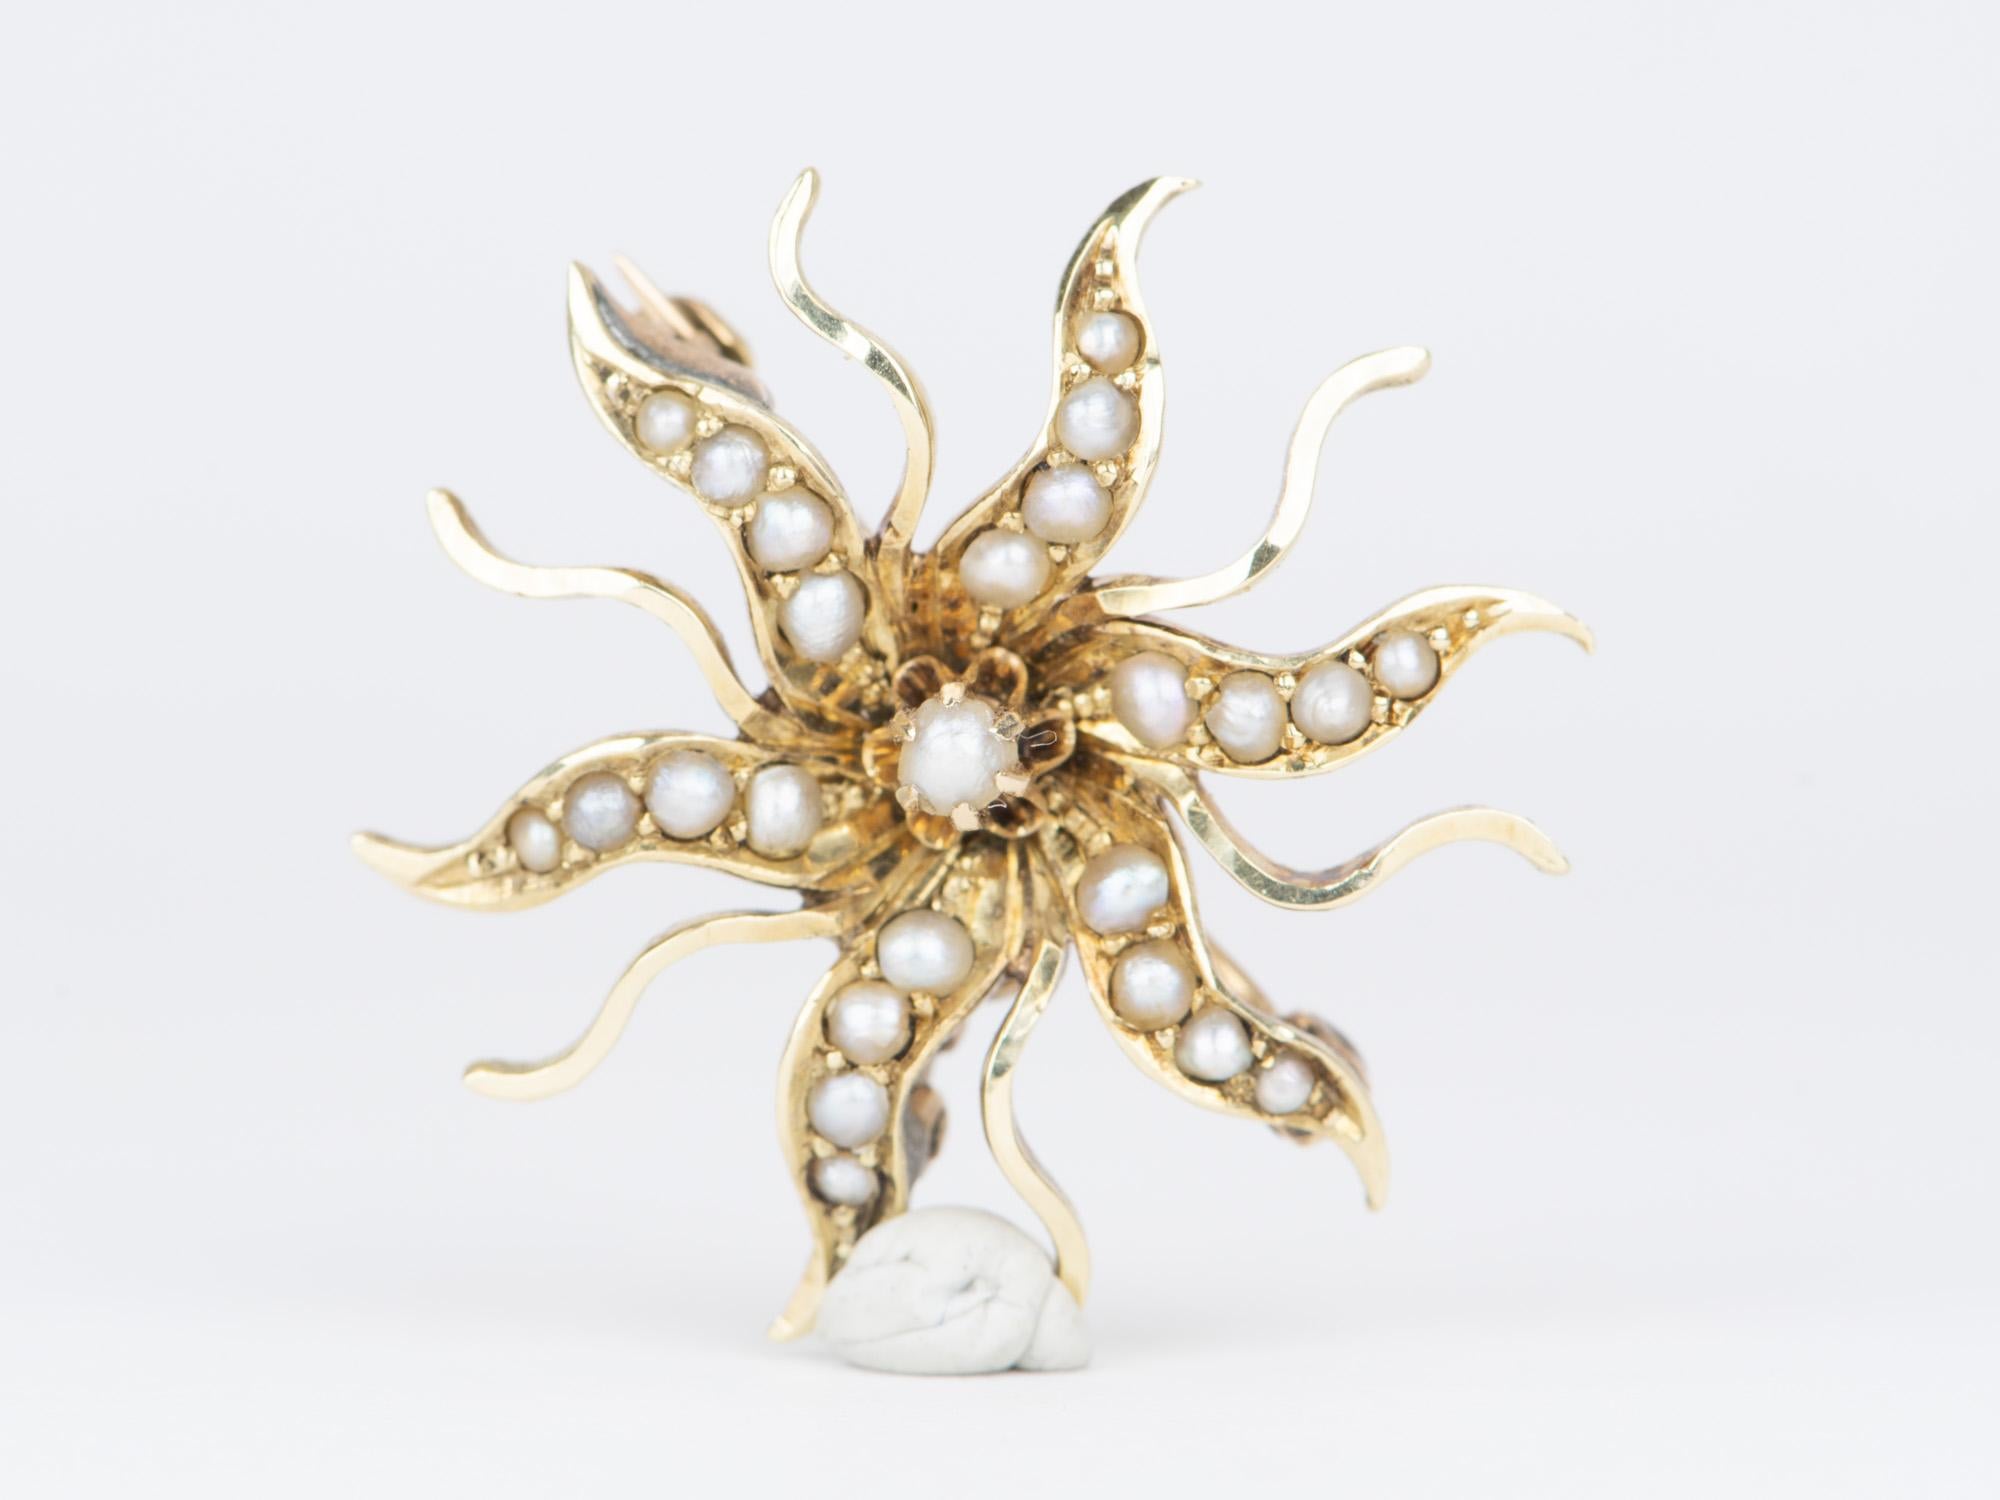 ♥ A solid 14K yellow gold antique Victorian seed pearl sunburst brooch pendant
♥ The brooch measures 24 mm in length, 24 mm in width, and 4.8 mm thick.

♥ Material: 14K Yellow Gold

♥ Weight: 3.3g

♥ All gemstones used are genuine, earth-mined, and